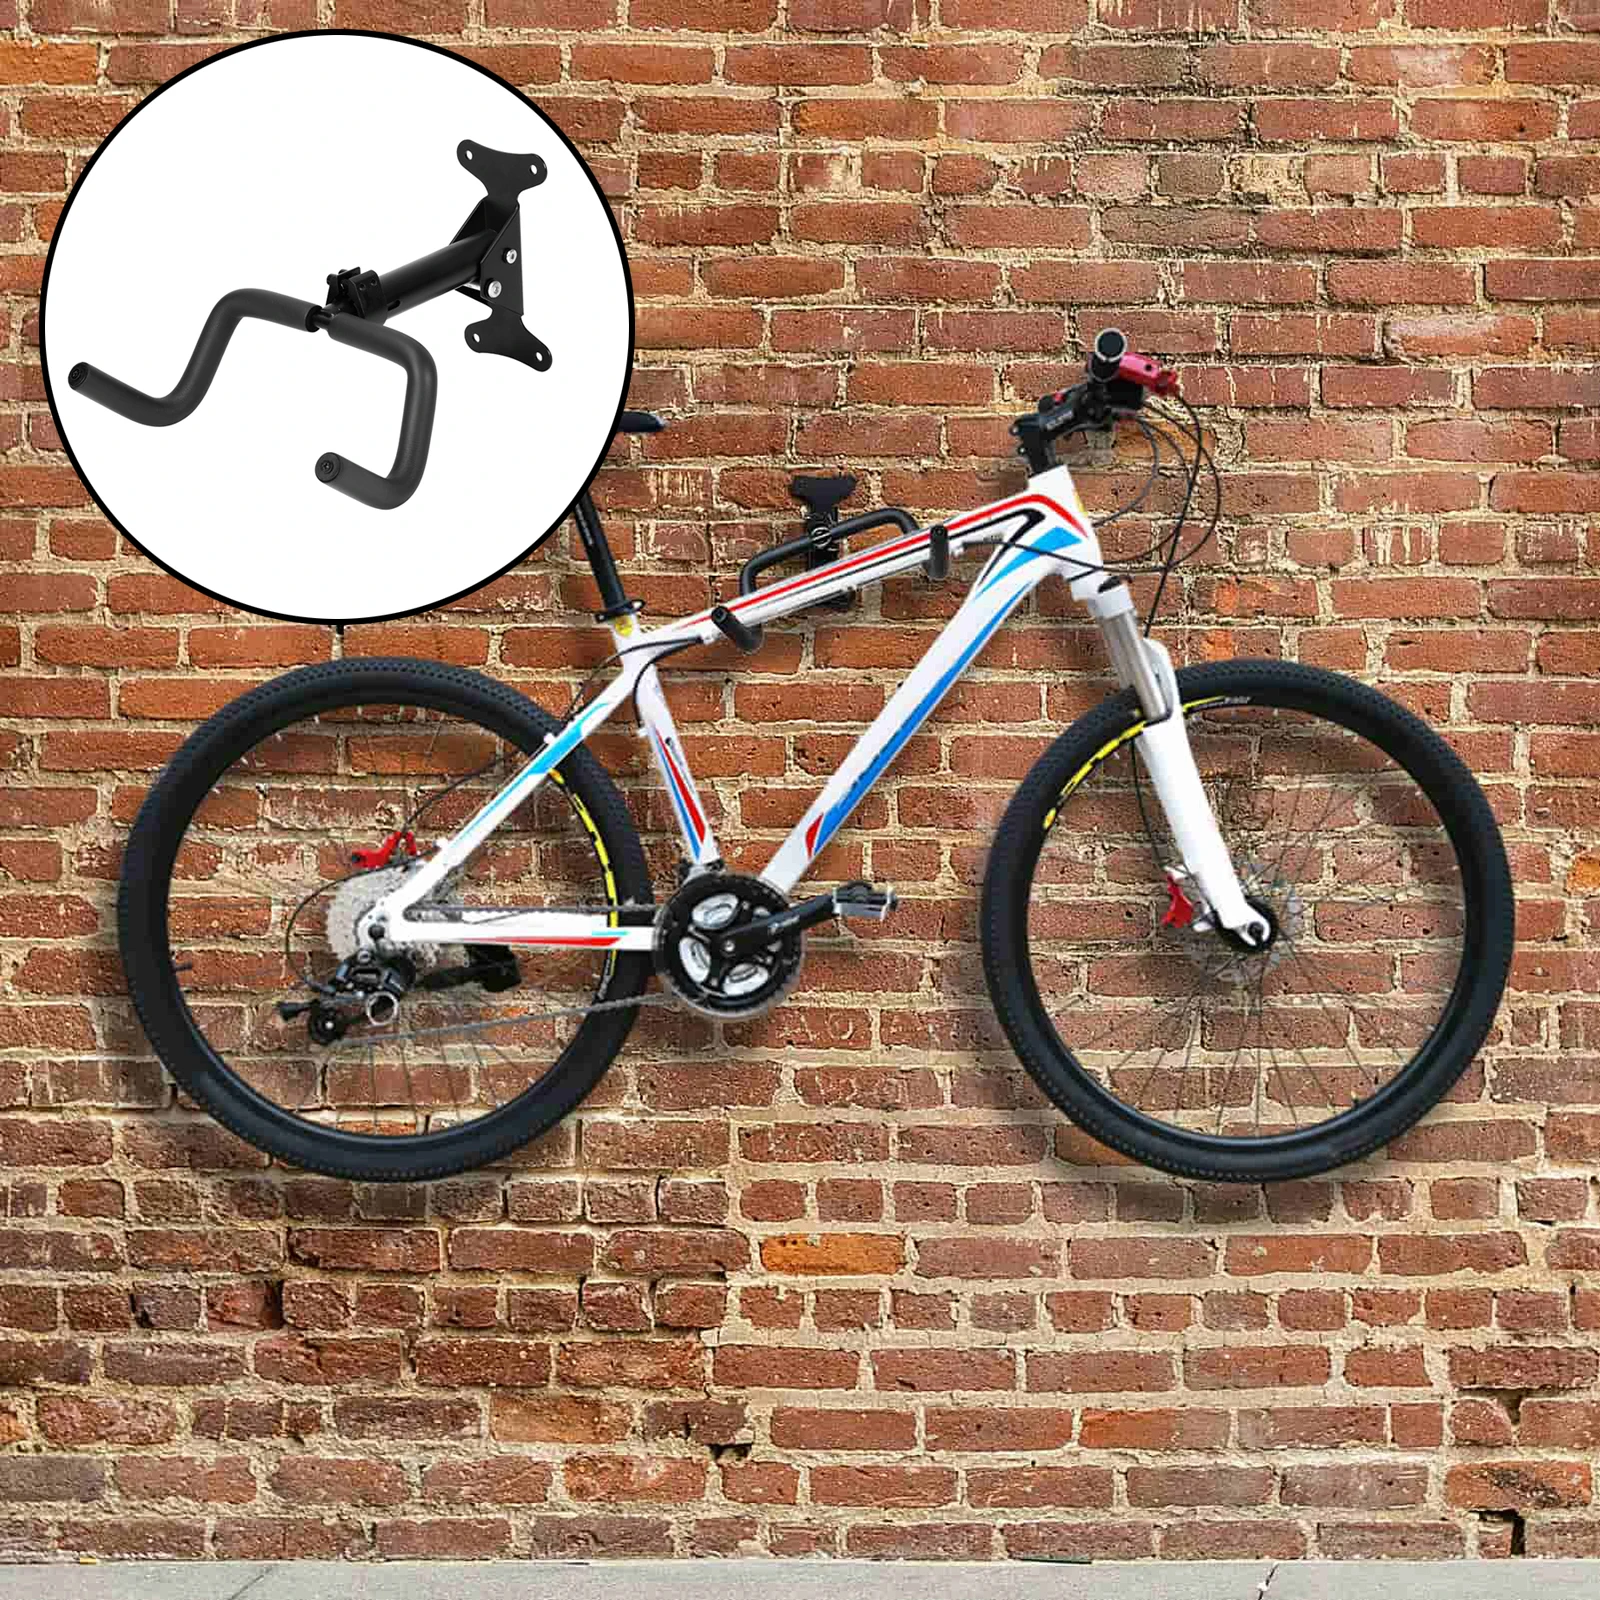 1PCS Bicycle Wall Stand Holder Foldable MTB Road Bike Storage Hanging Hanger Hook Cycling Display Rack Support Stand Bracket